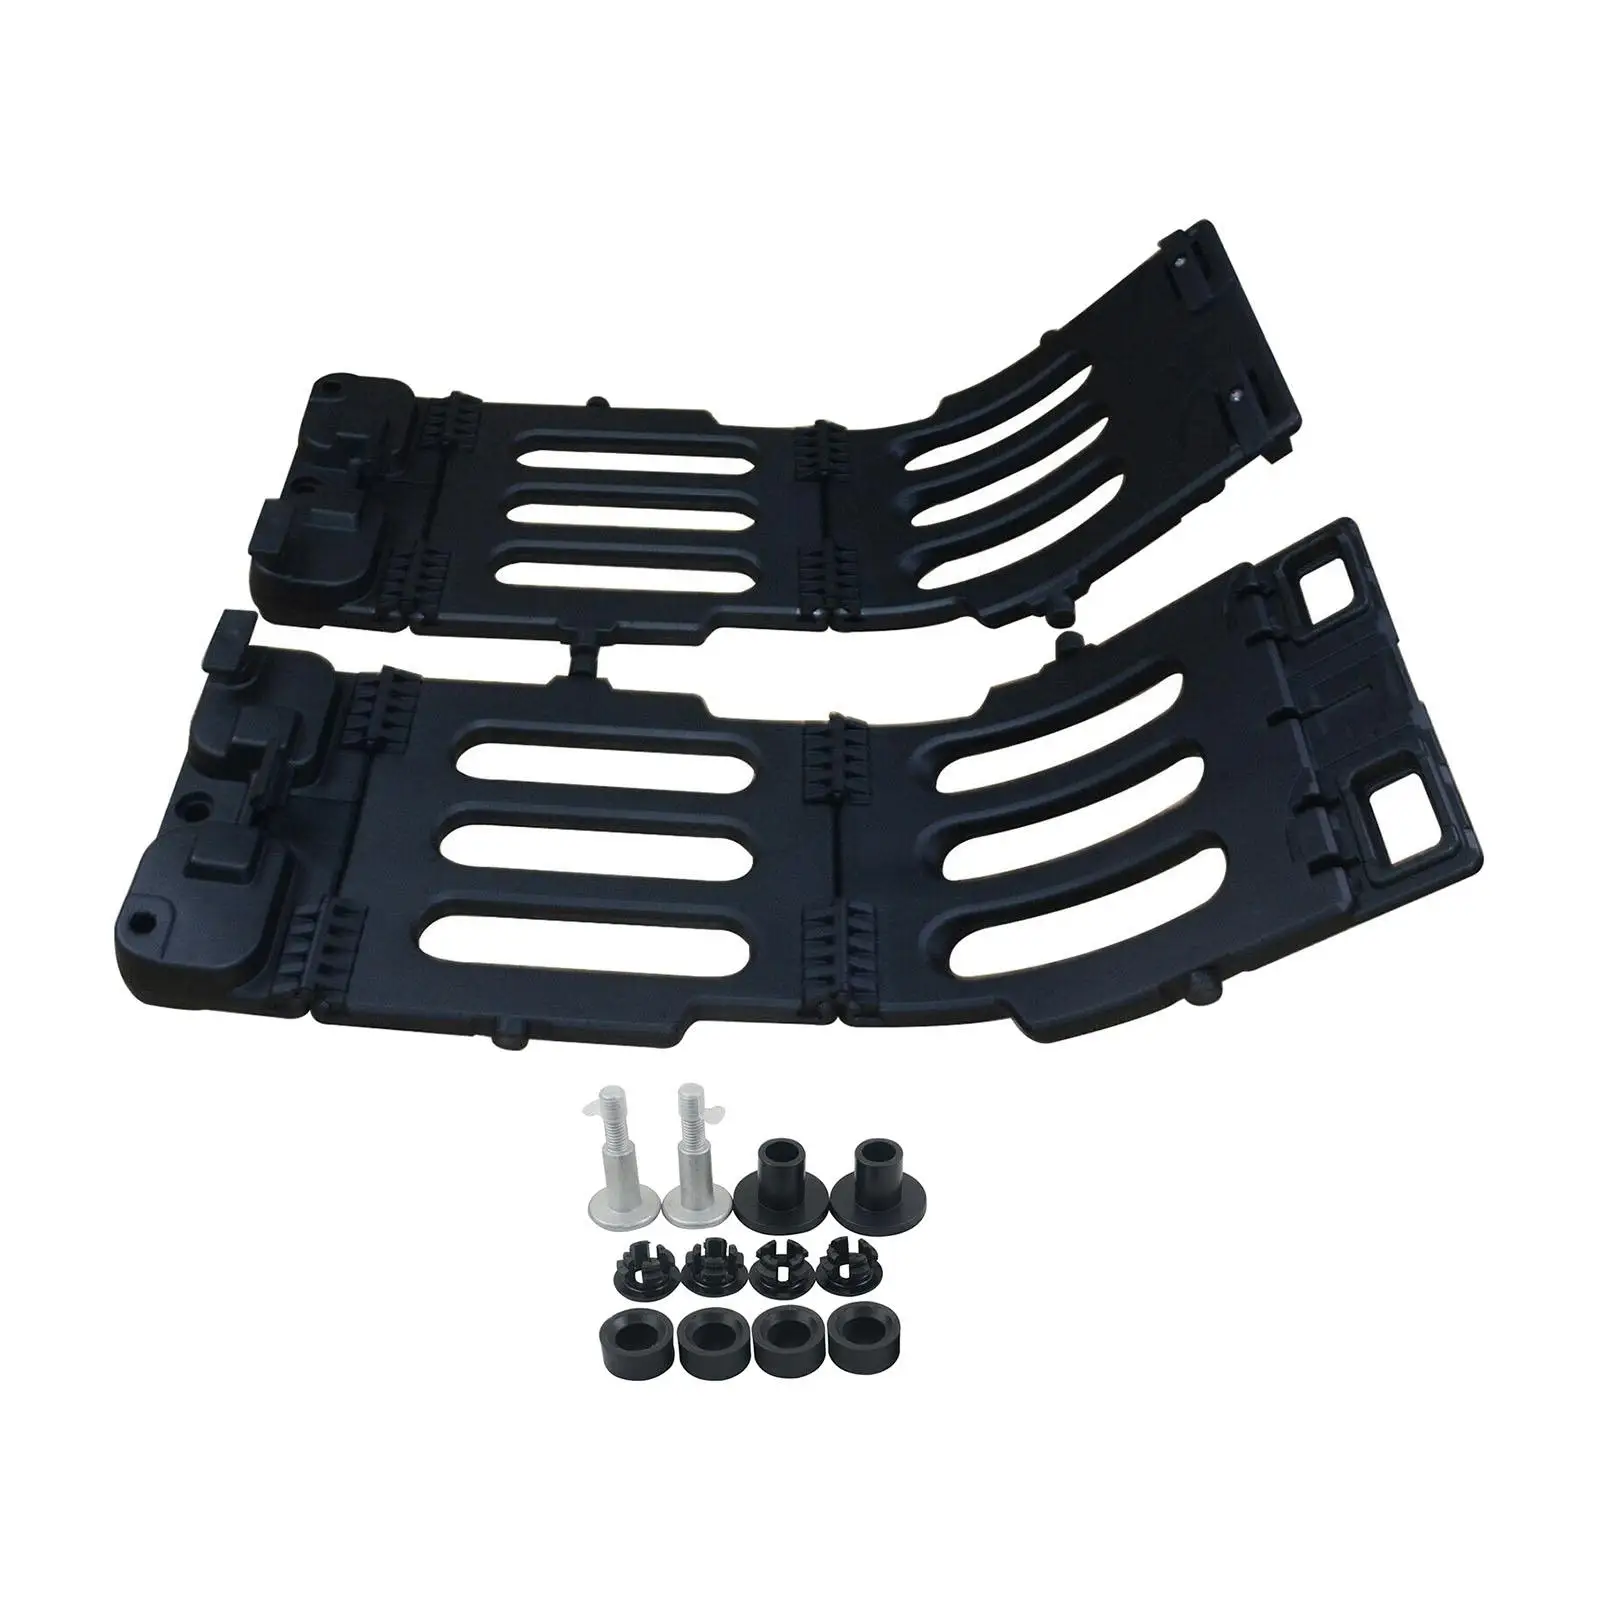 Truck Bed Extender Stowable-99286A40-C fl3Z99286A40C   2015-2021 Replaces Accessories Easy to Install